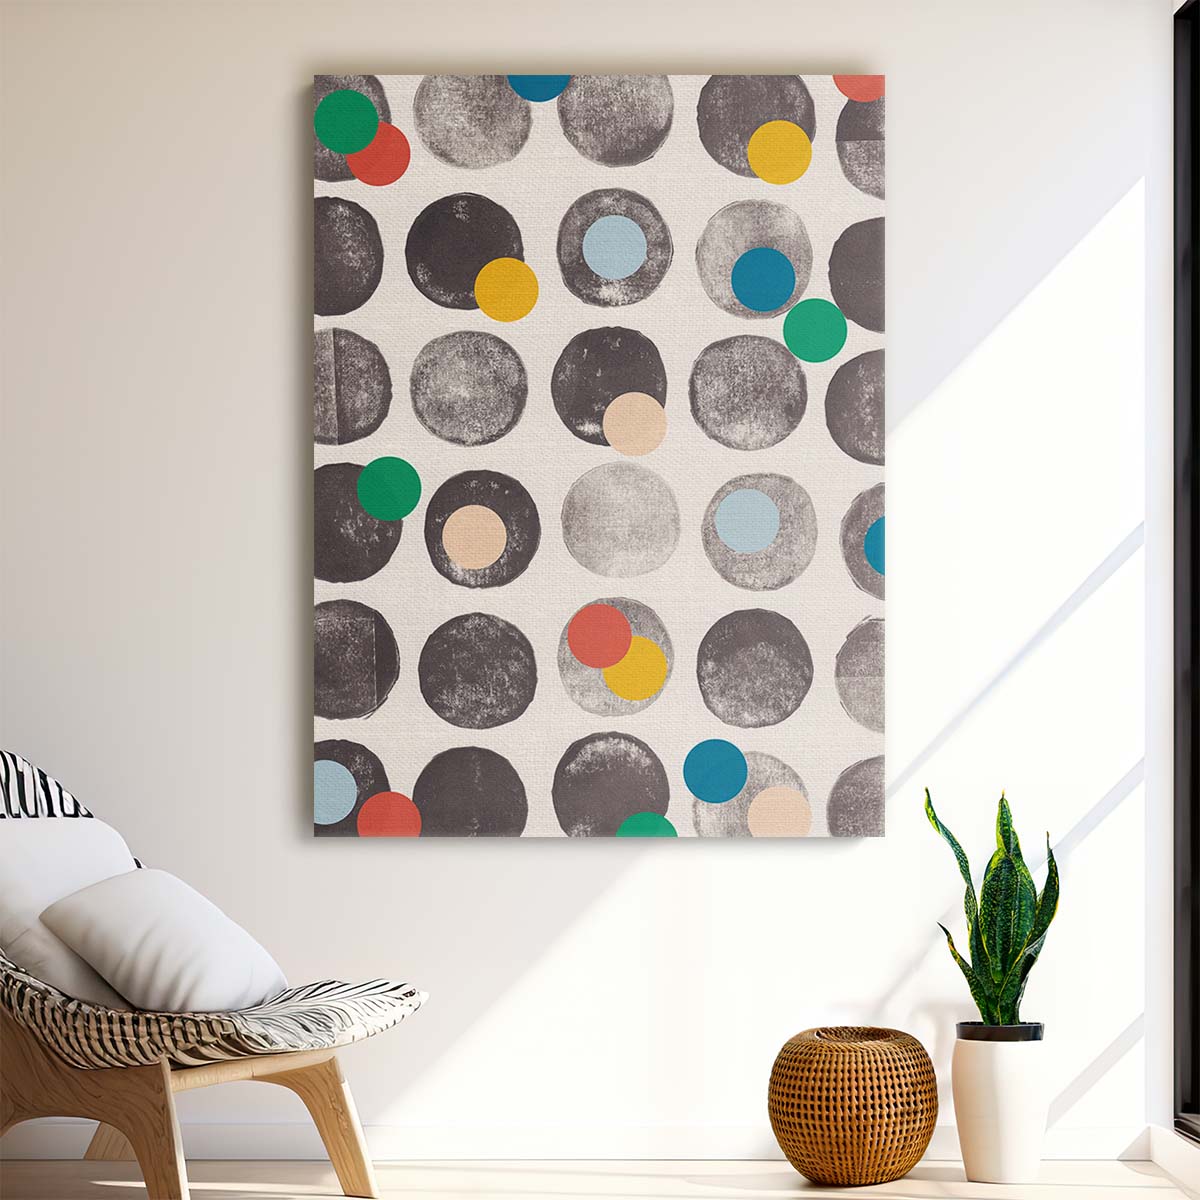 Vibrant Geometric Abstract Illustration - Monochrome Boho Circle Wall Art by Luxuriance Designs, made in USA